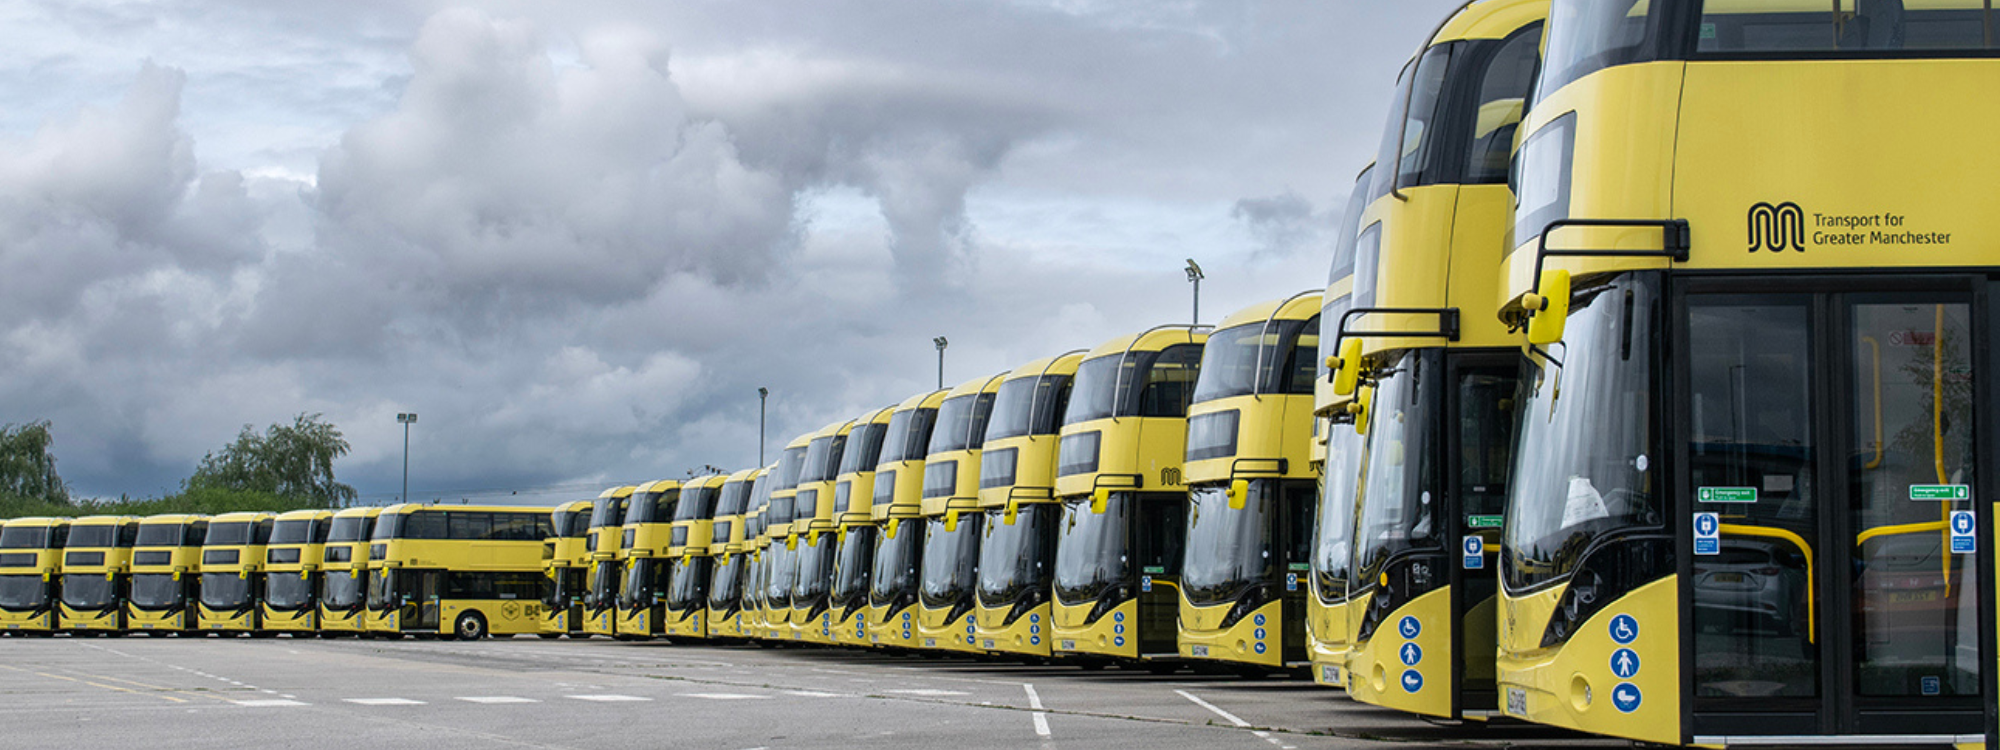 Row of bee network buses